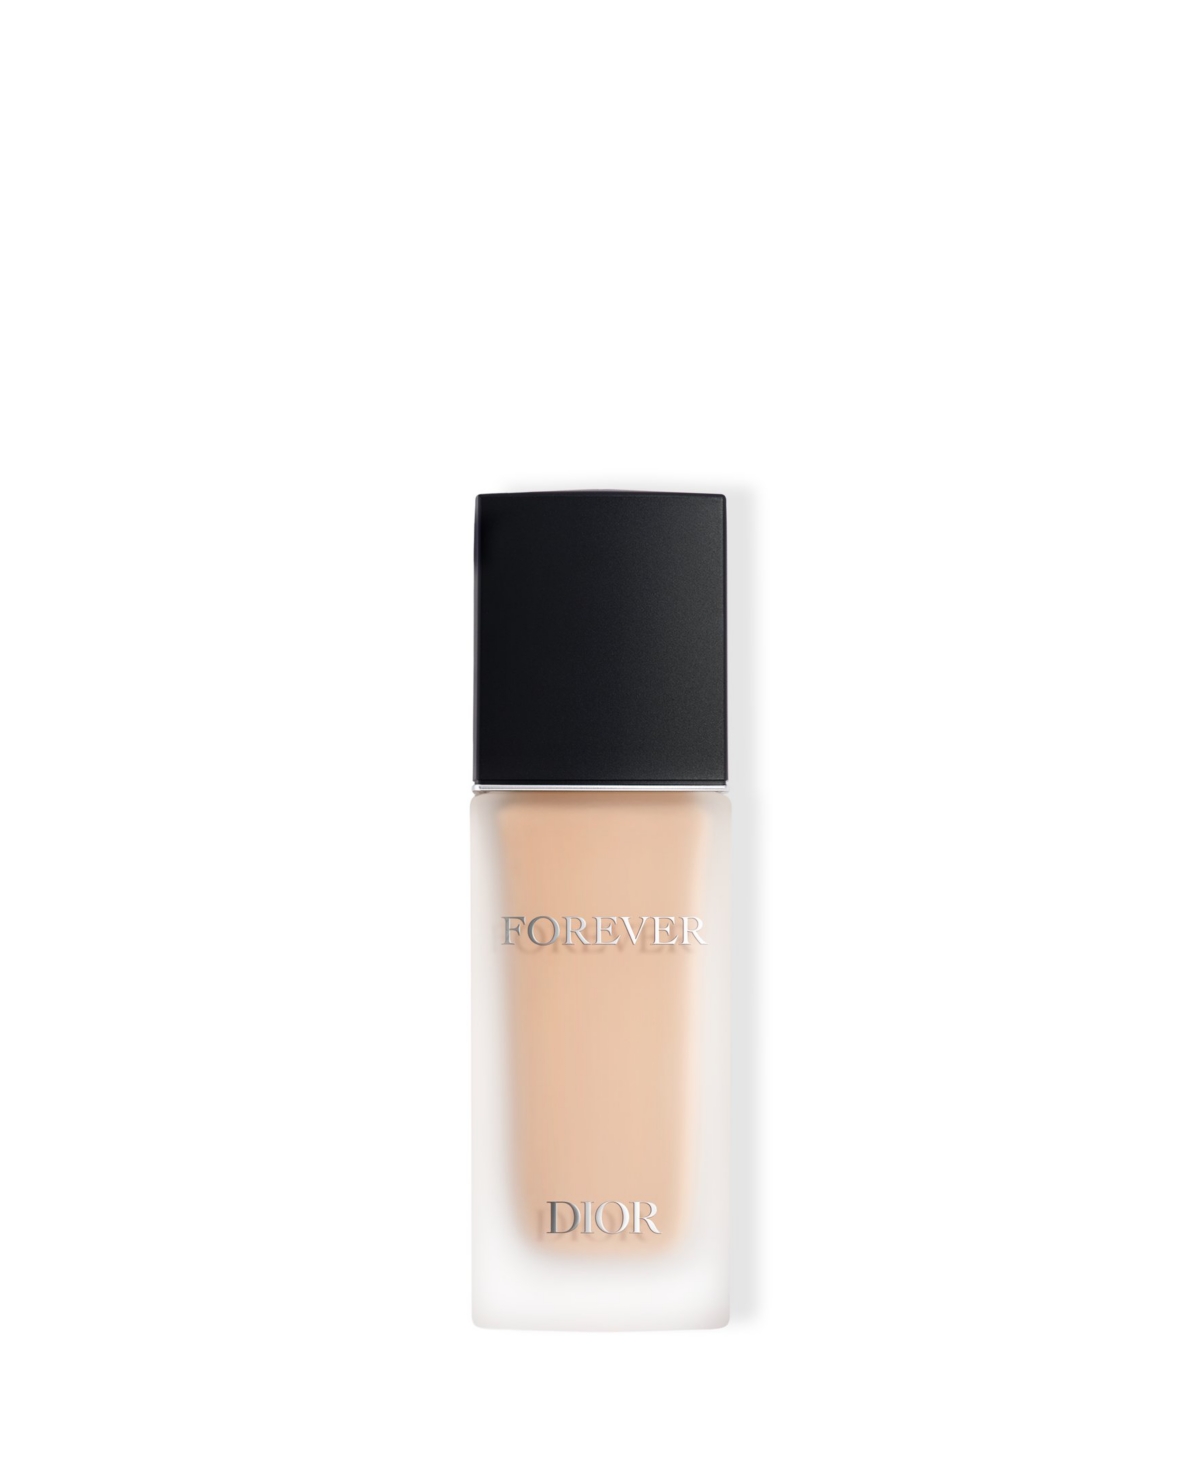 Dior Forever Matte Skincare Foundation Spf 15 In Cool (fair Skin With Cool Undertones)